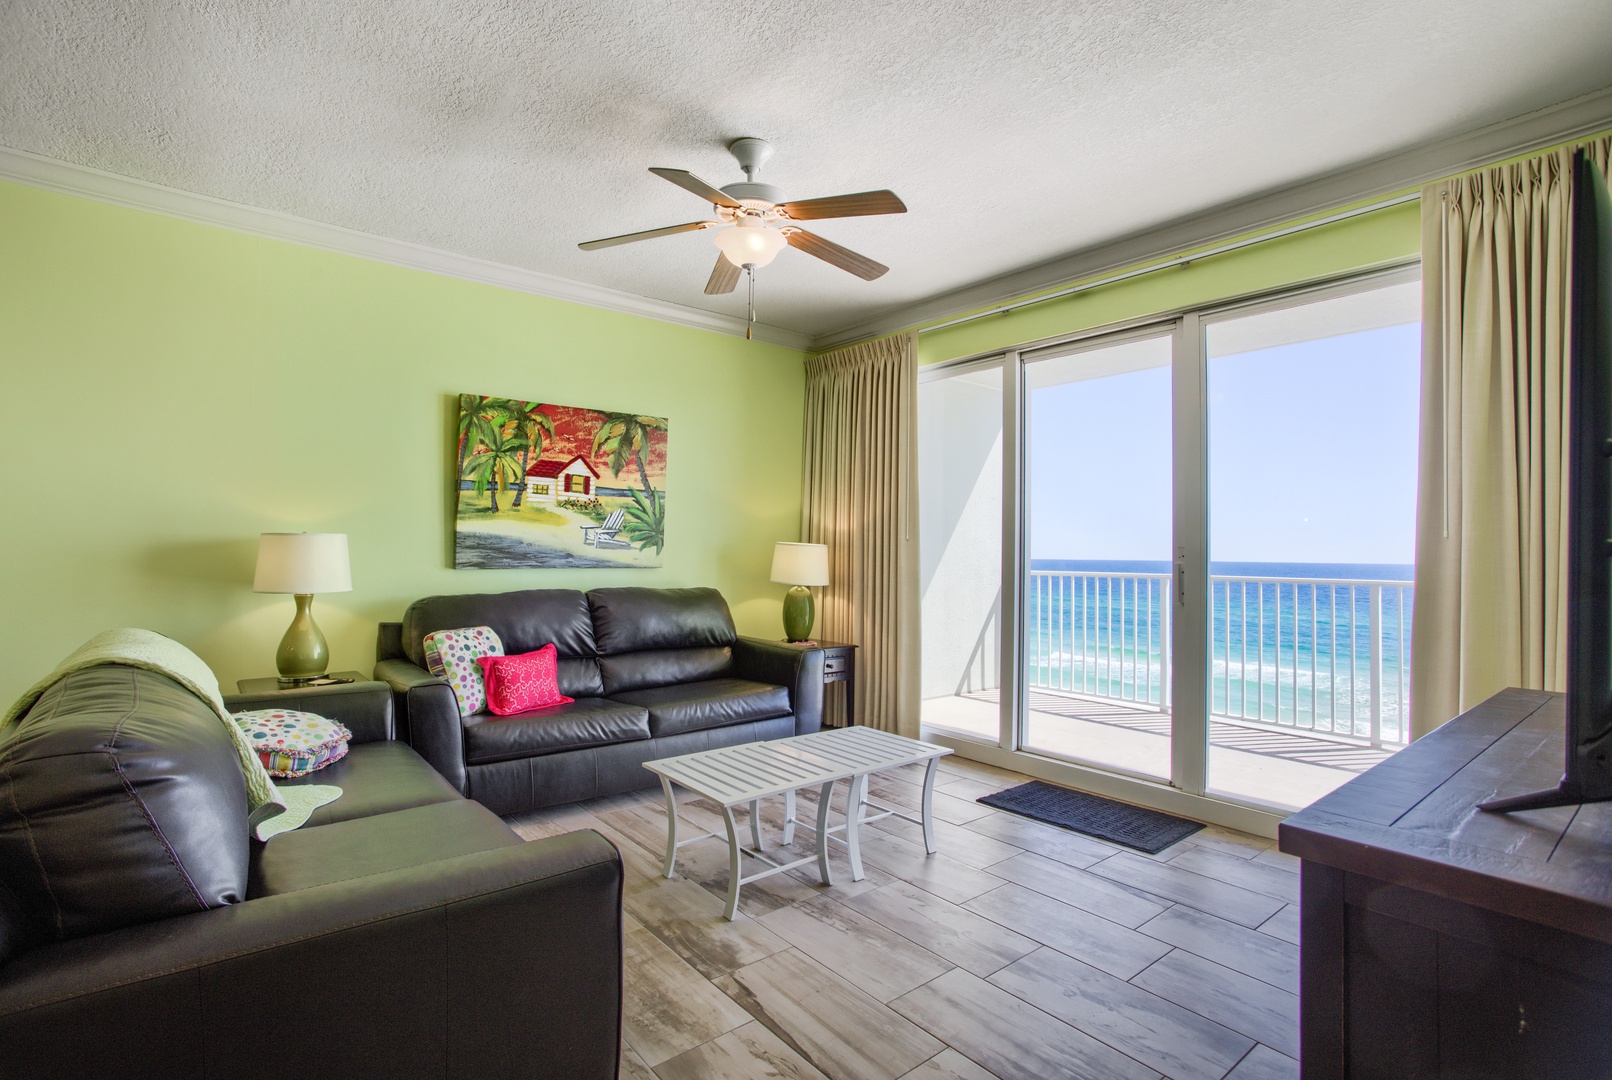 Take in the incredible Ocean Views from your Living Room and private Balcony